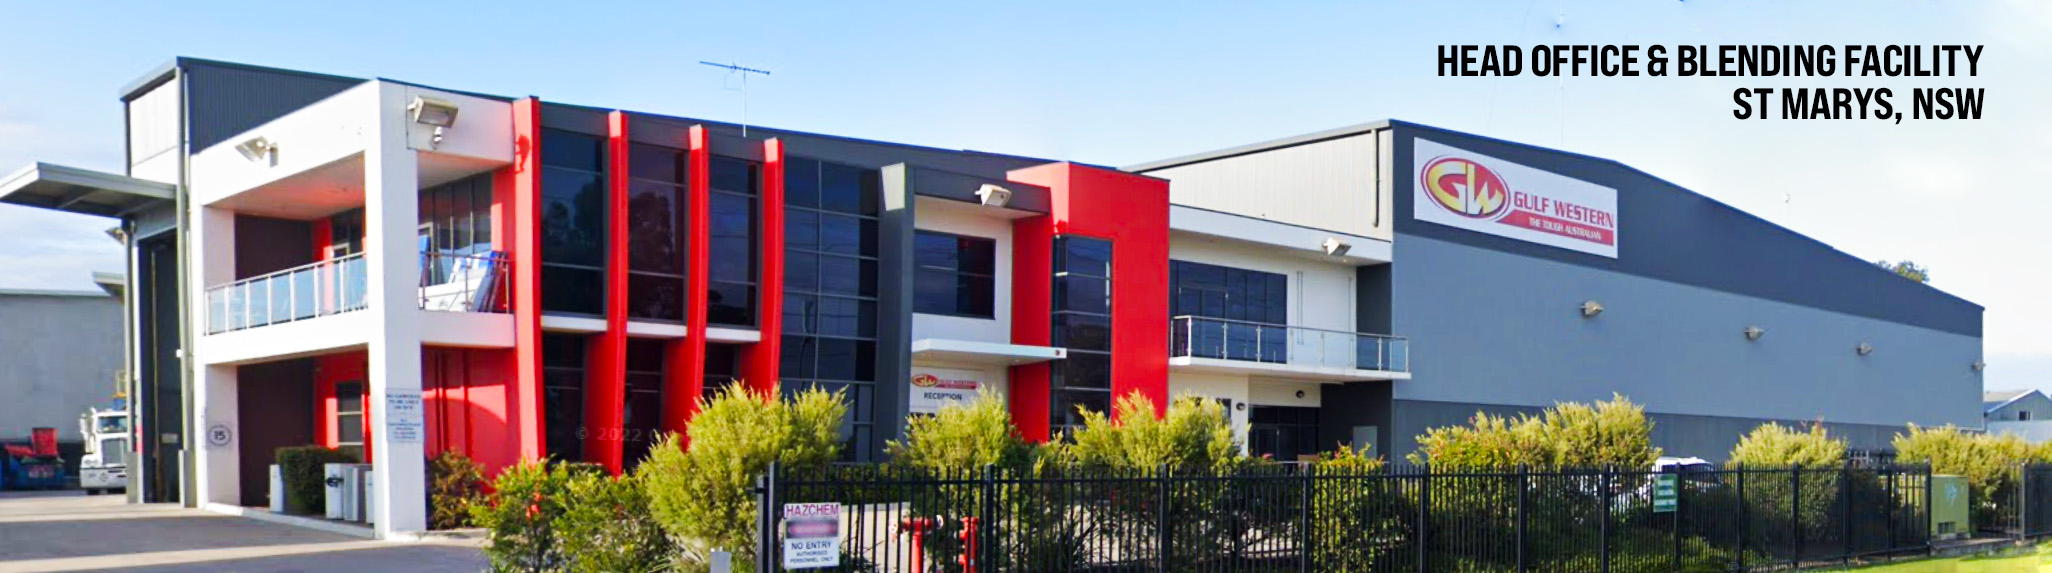 Picture of Gulf Western's Head Office / Blending Facility in St Marys, NSW